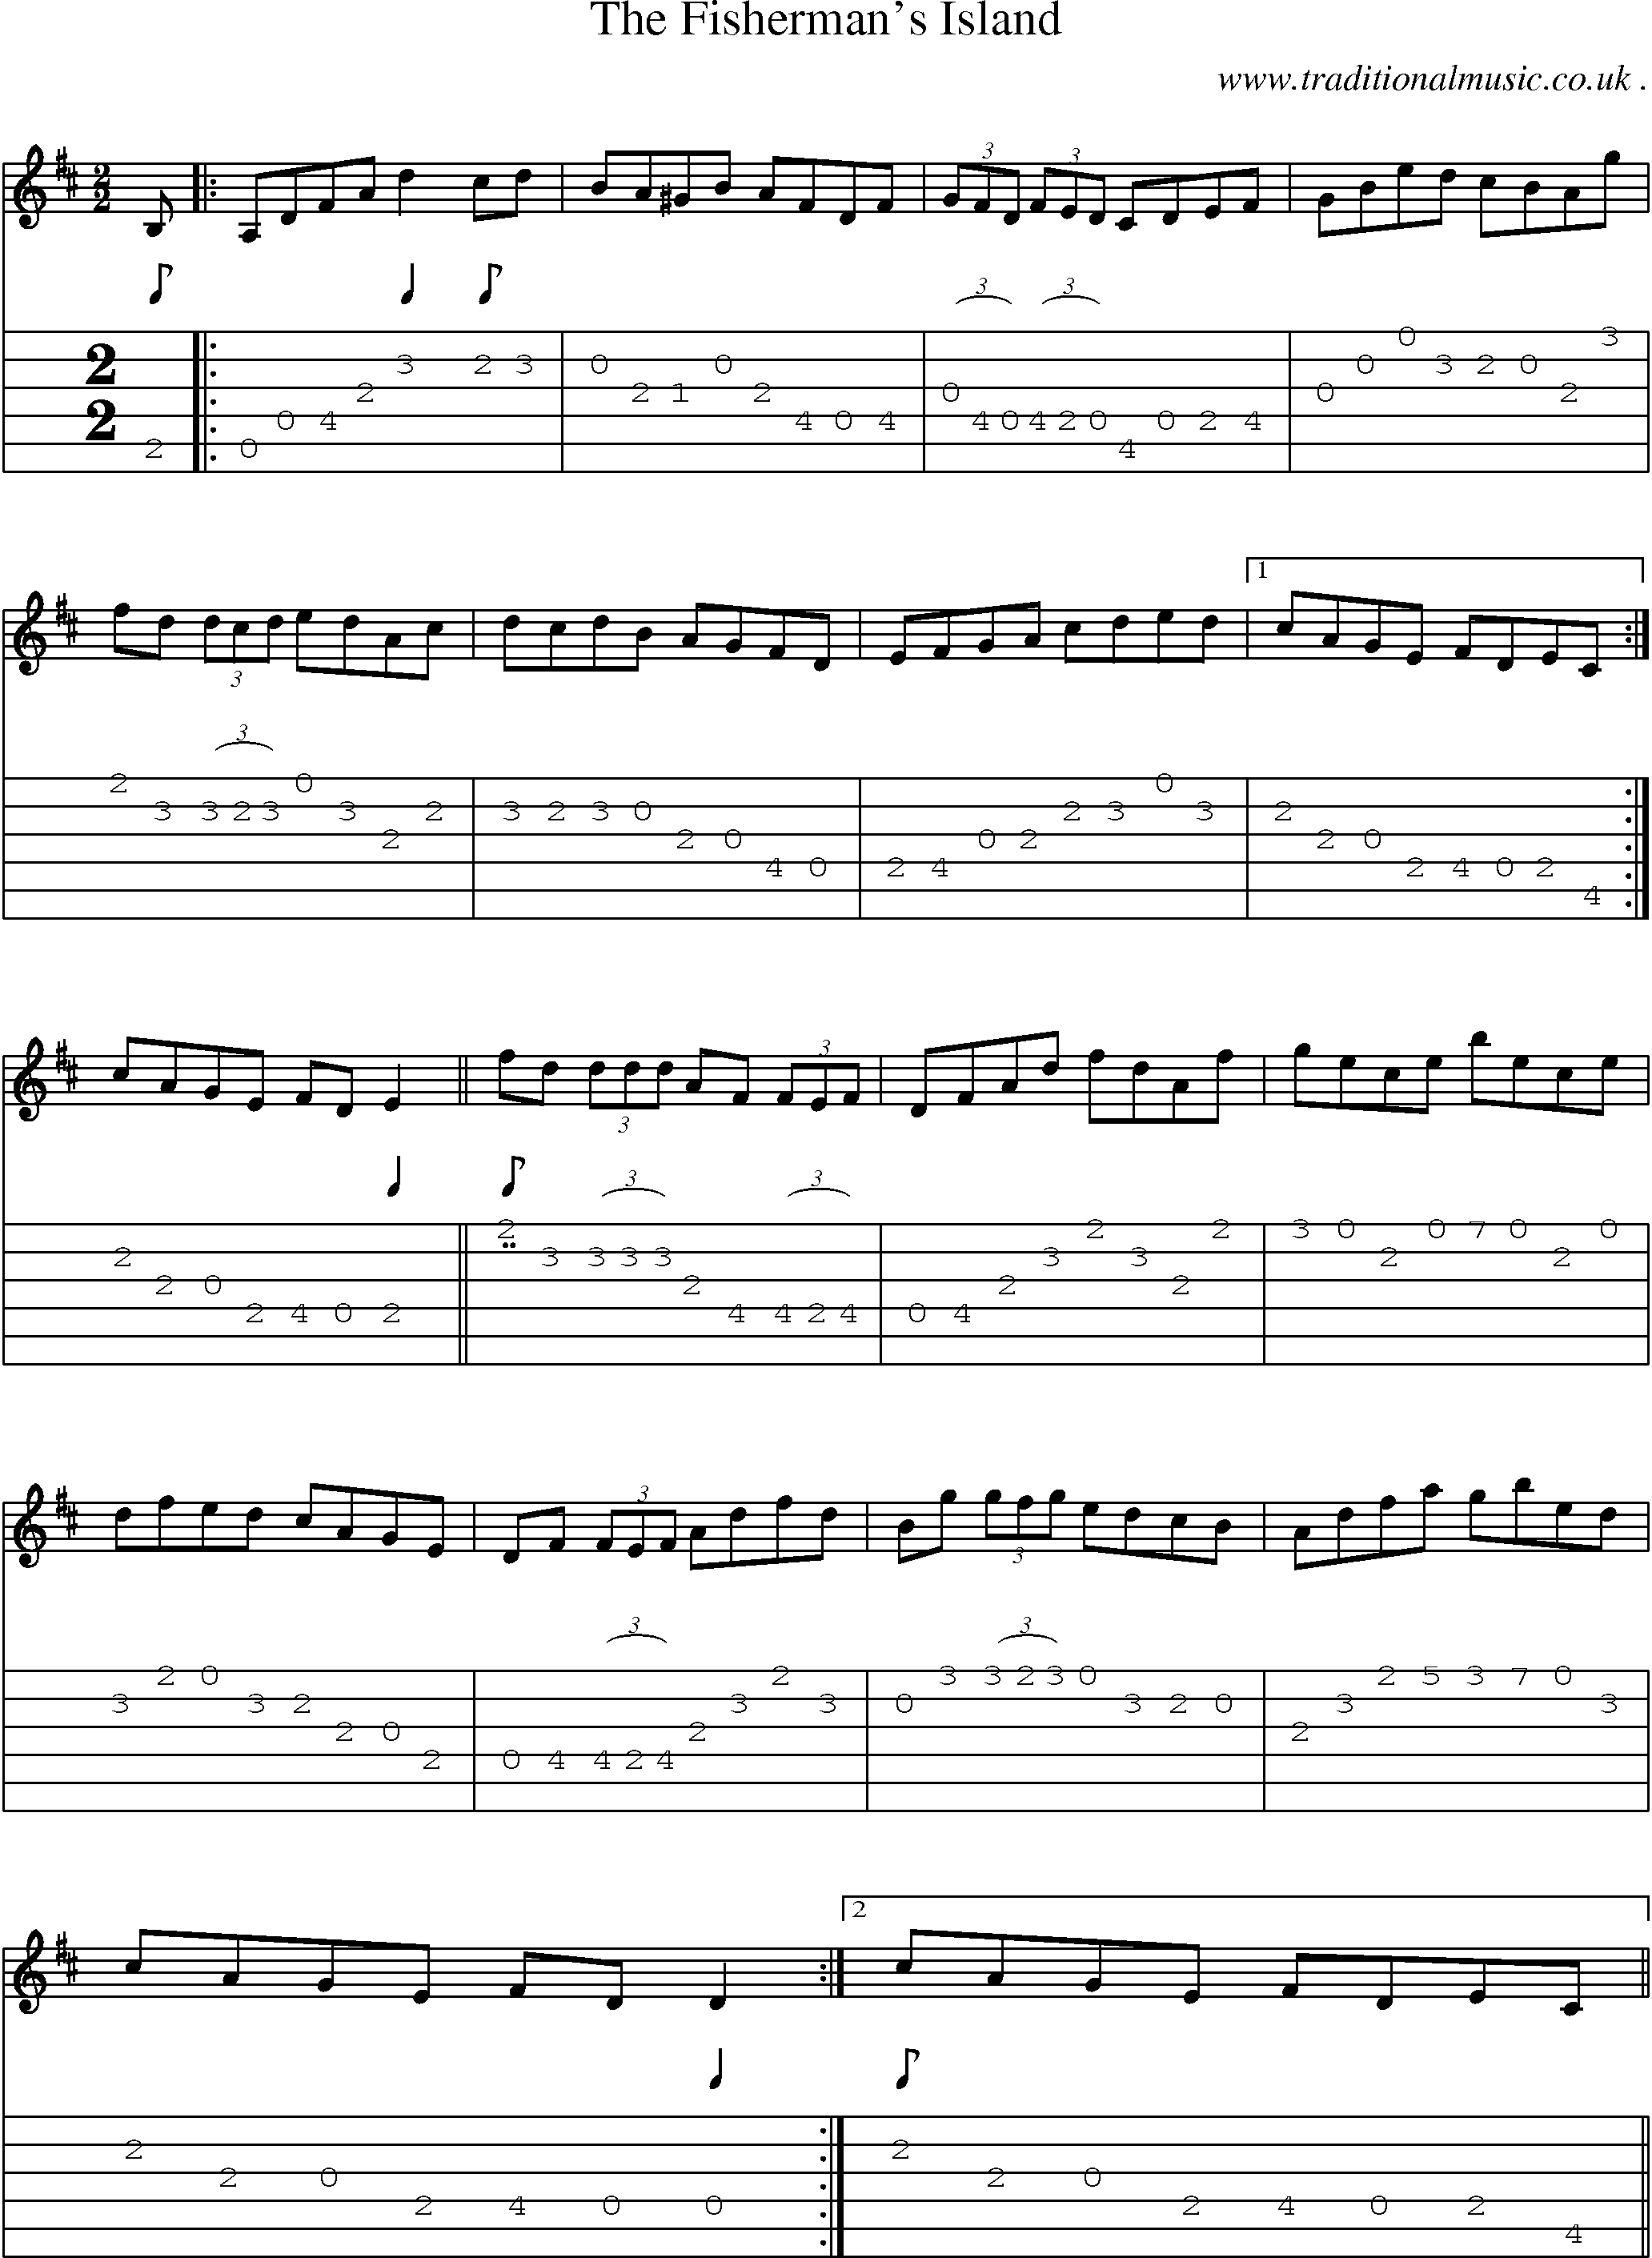 Sheet-Music and Guitar Tabs for The Fishermans Island